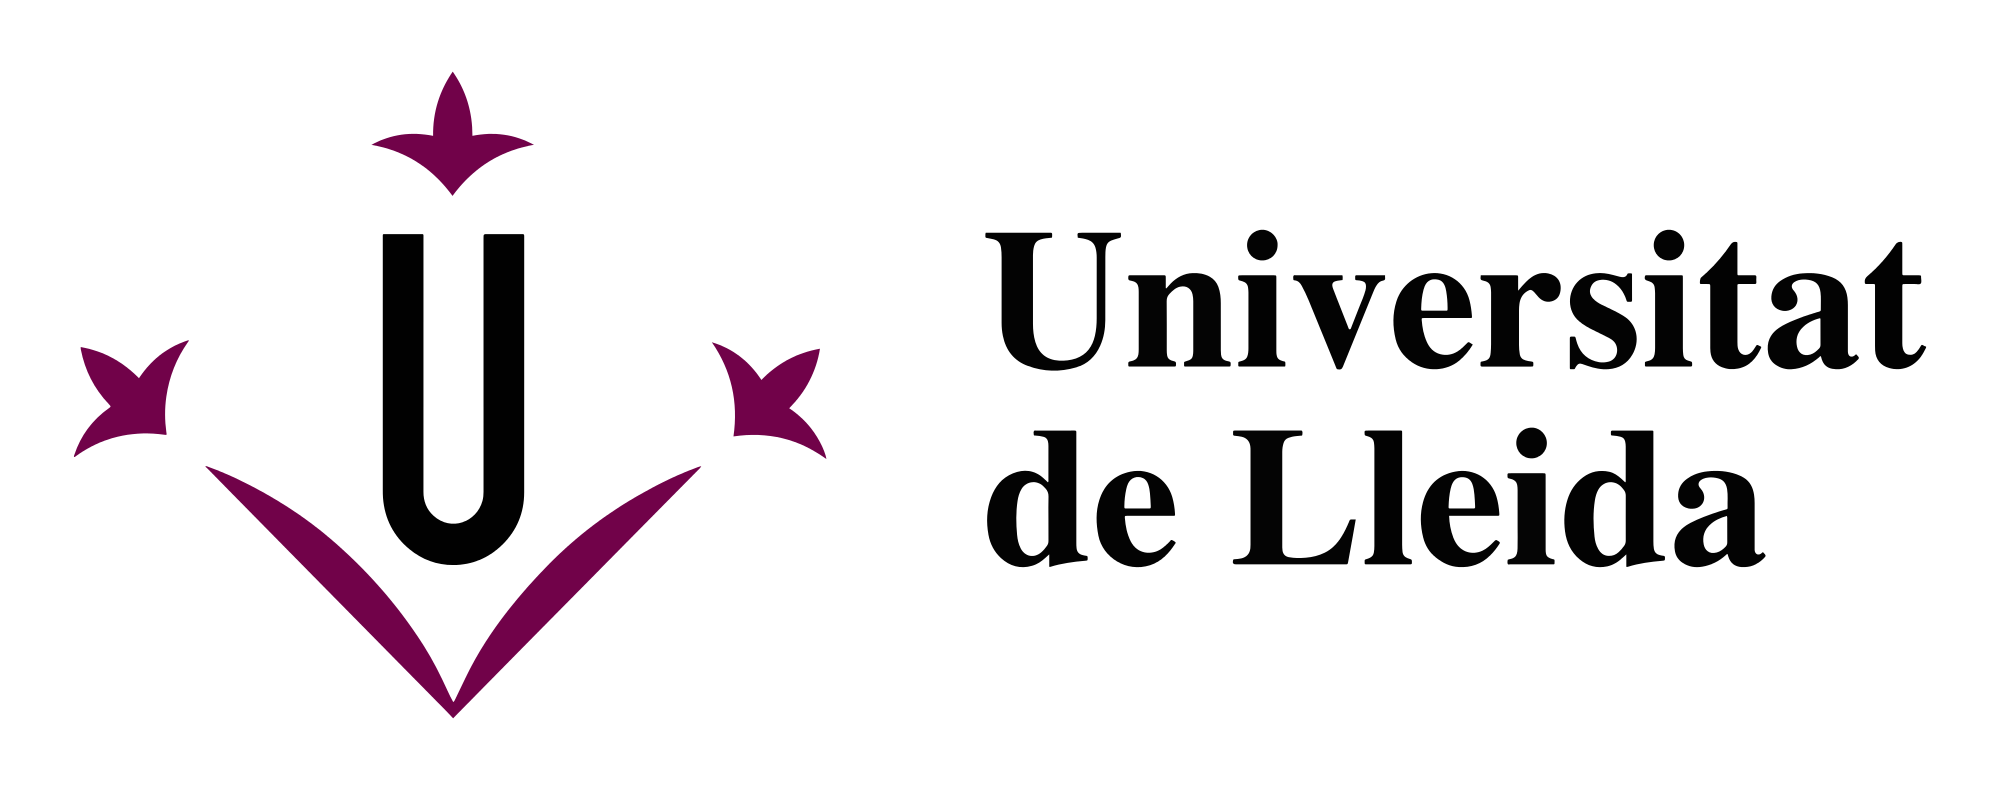 Spain University of Lleida Master Scholarships for Foreign Students 2018